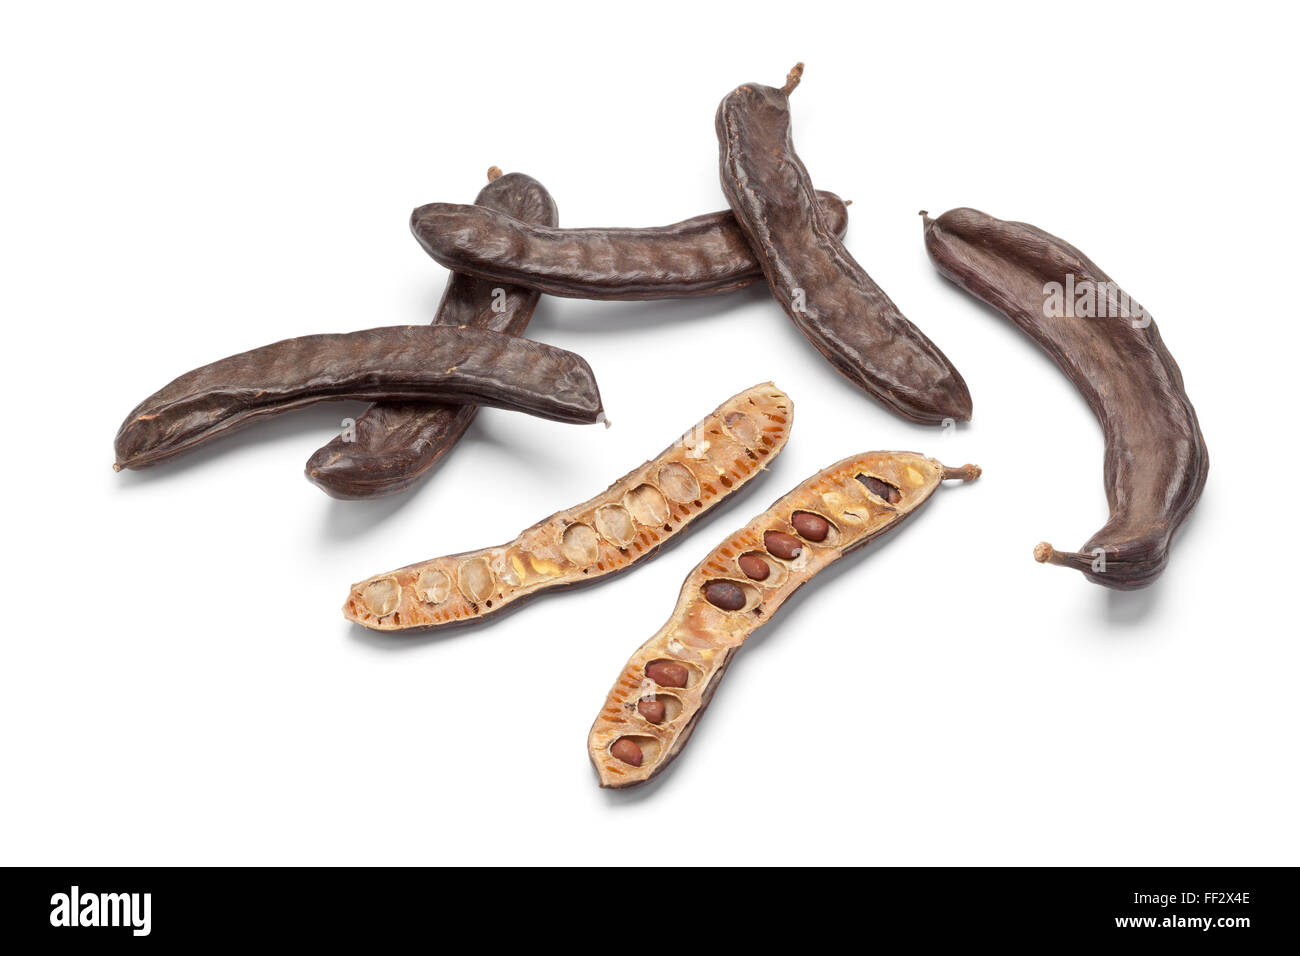 Whole and half Carob pods on white background Stock Photo